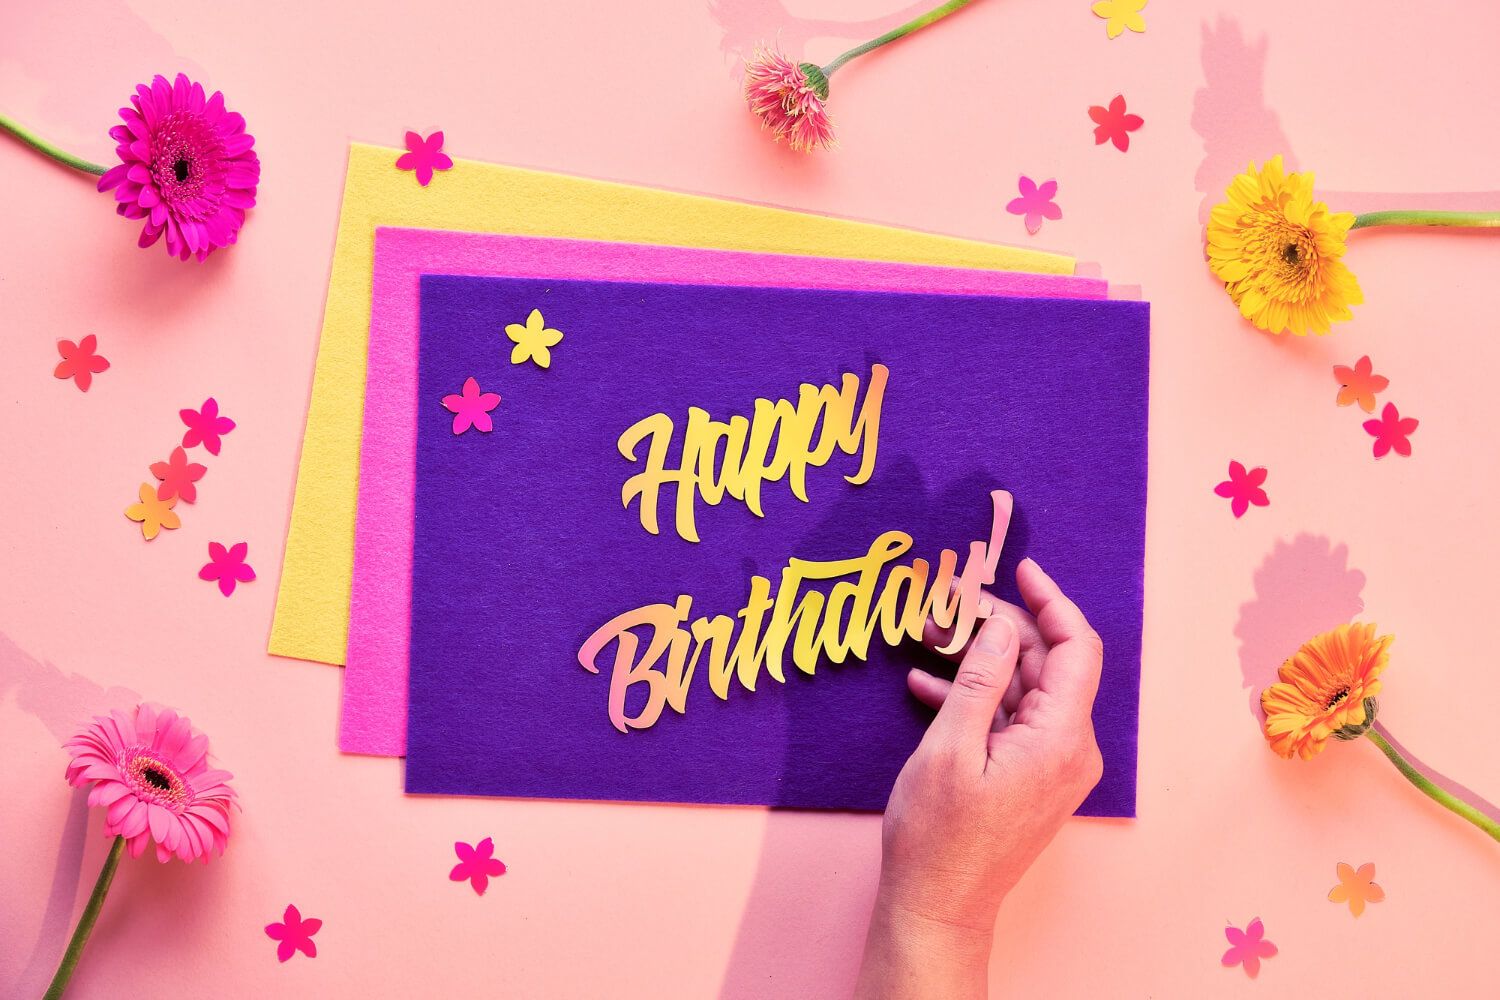 Birthday wishes written on colorful cards.